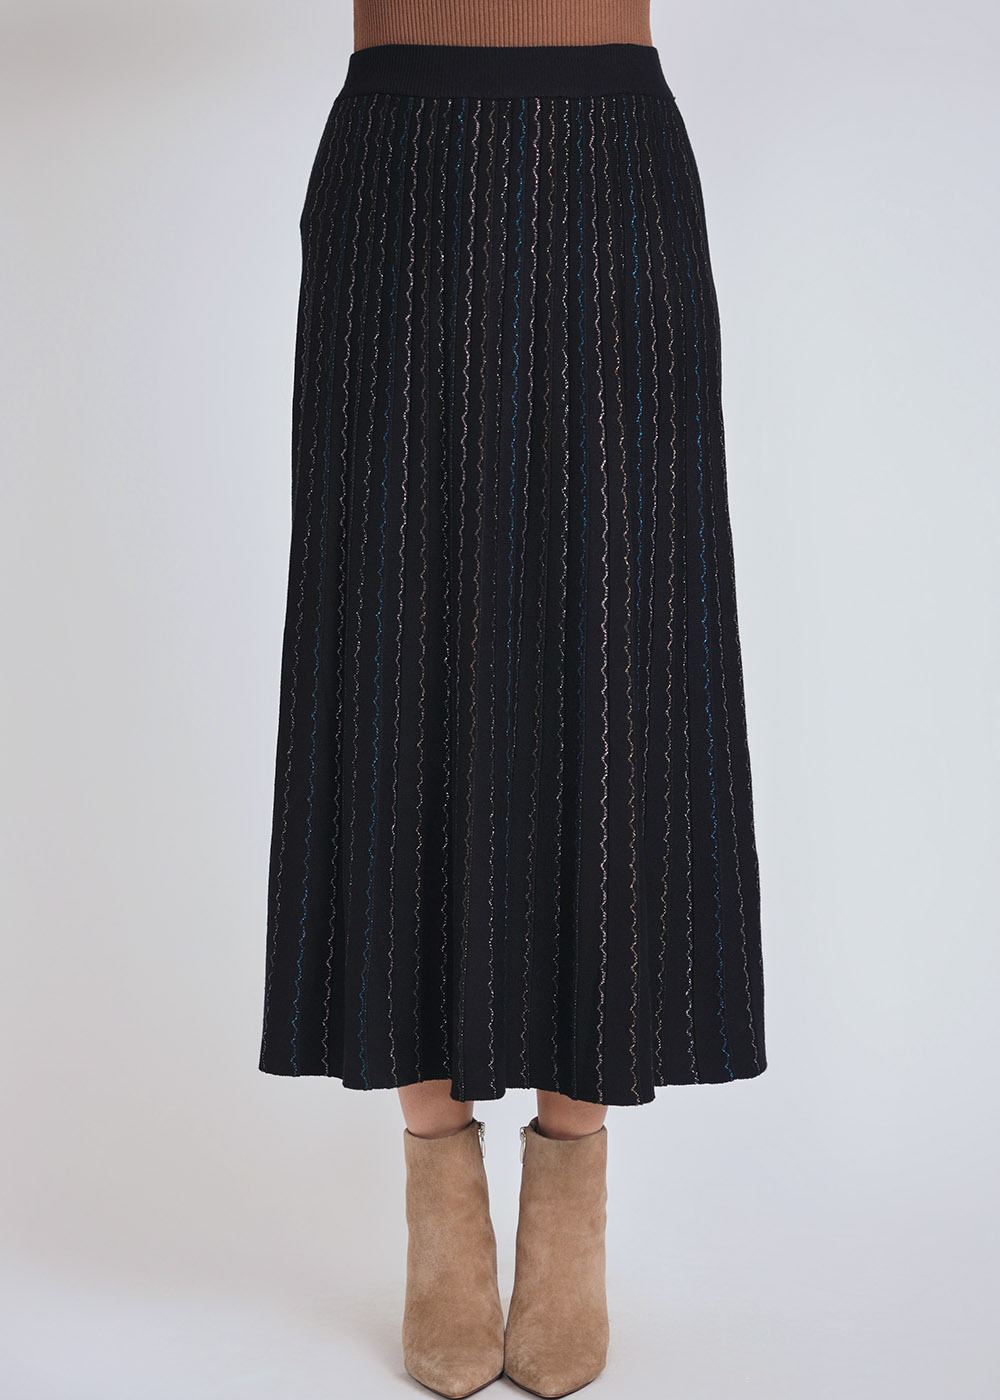 Black Ribbed Midi Skirt with Colorful Streaks